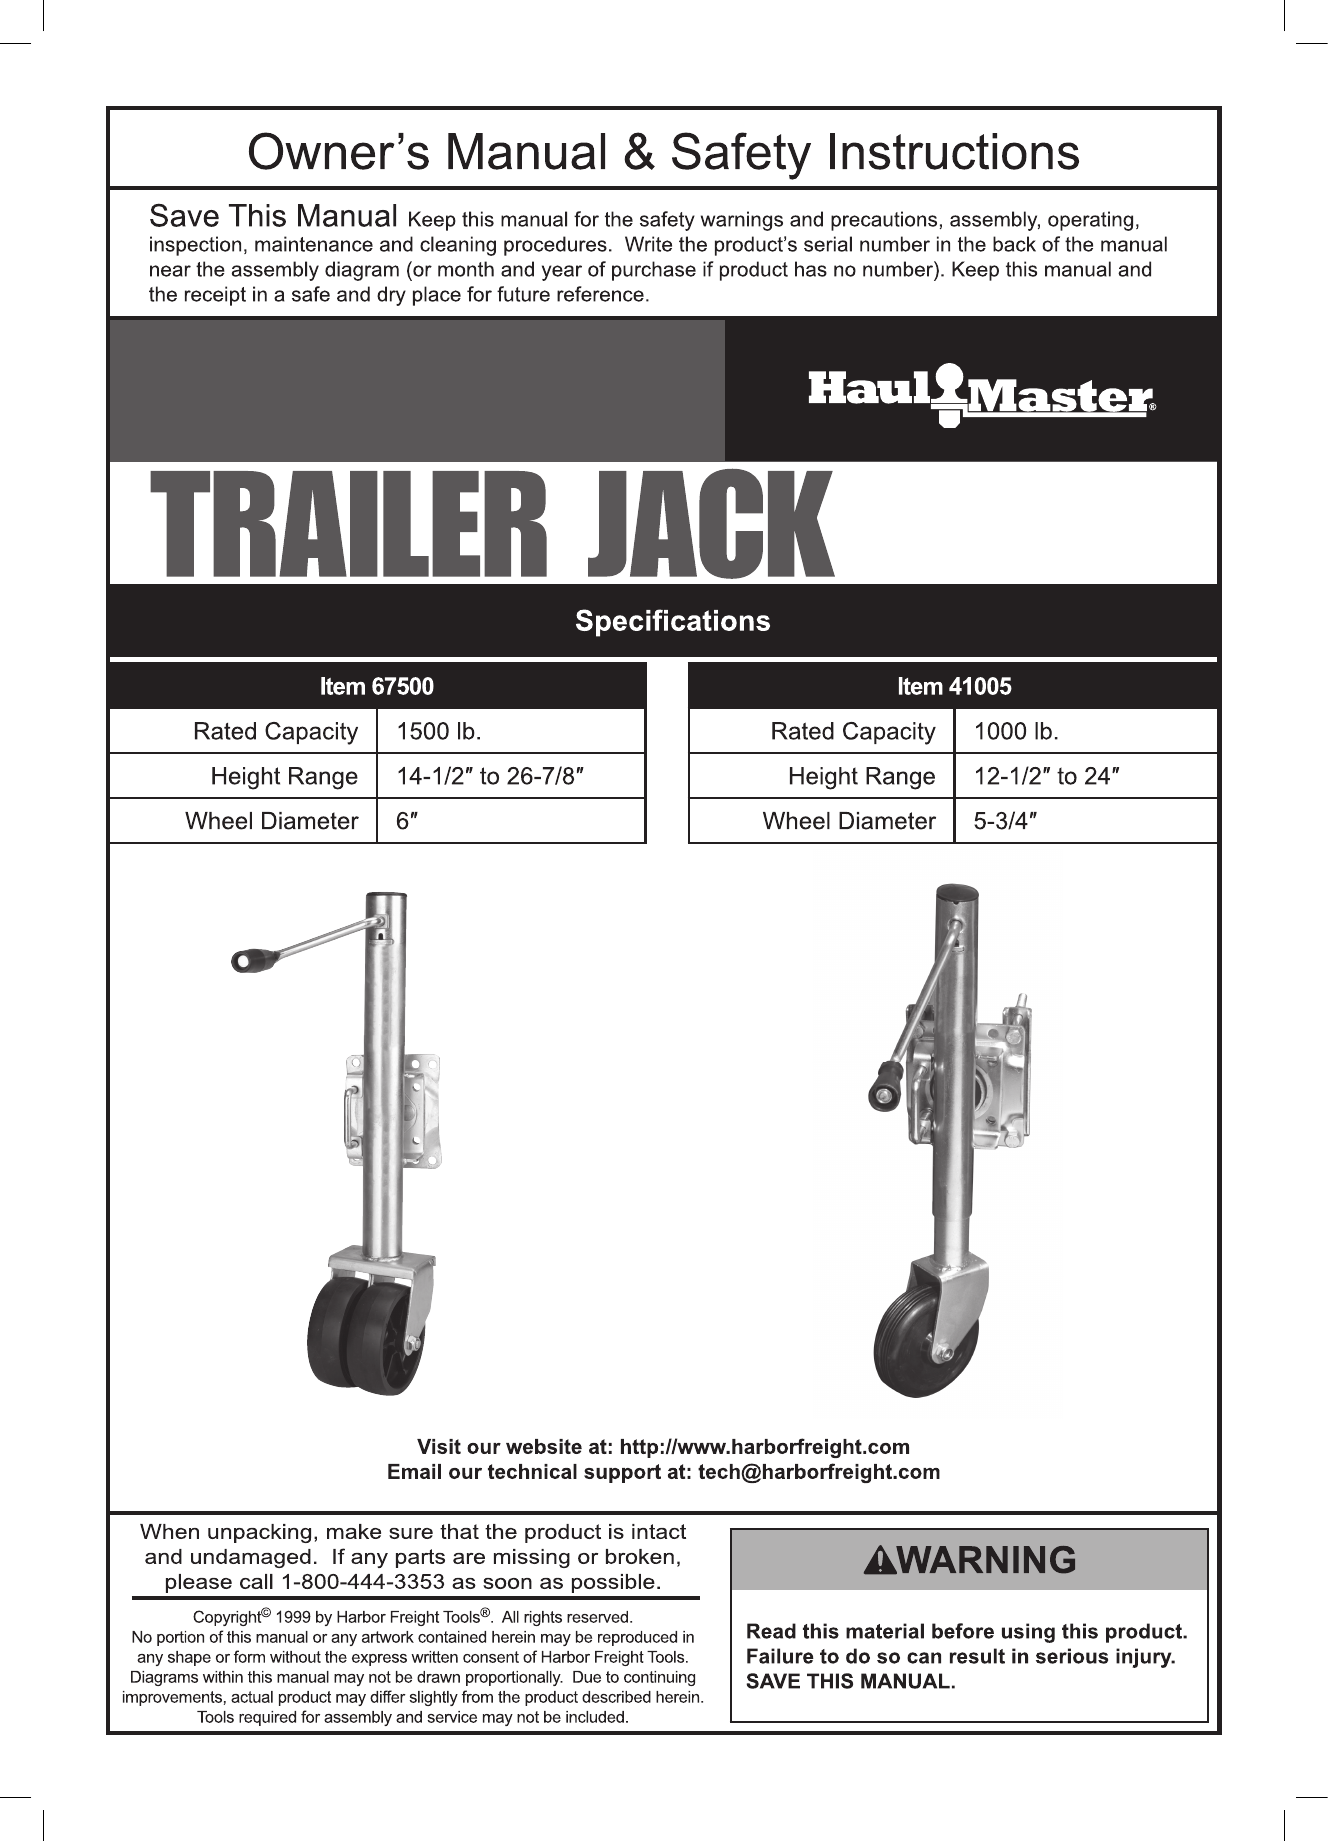 Page 1 of 8 - Harbor-Freight Harbor-Freight-1000-Lb-Capacity-Swing-Back-Trailer-Jack-Product-Manual-  Harbor-freight-1000-lb-capacity-swing-back-trailer-jack-product-manual